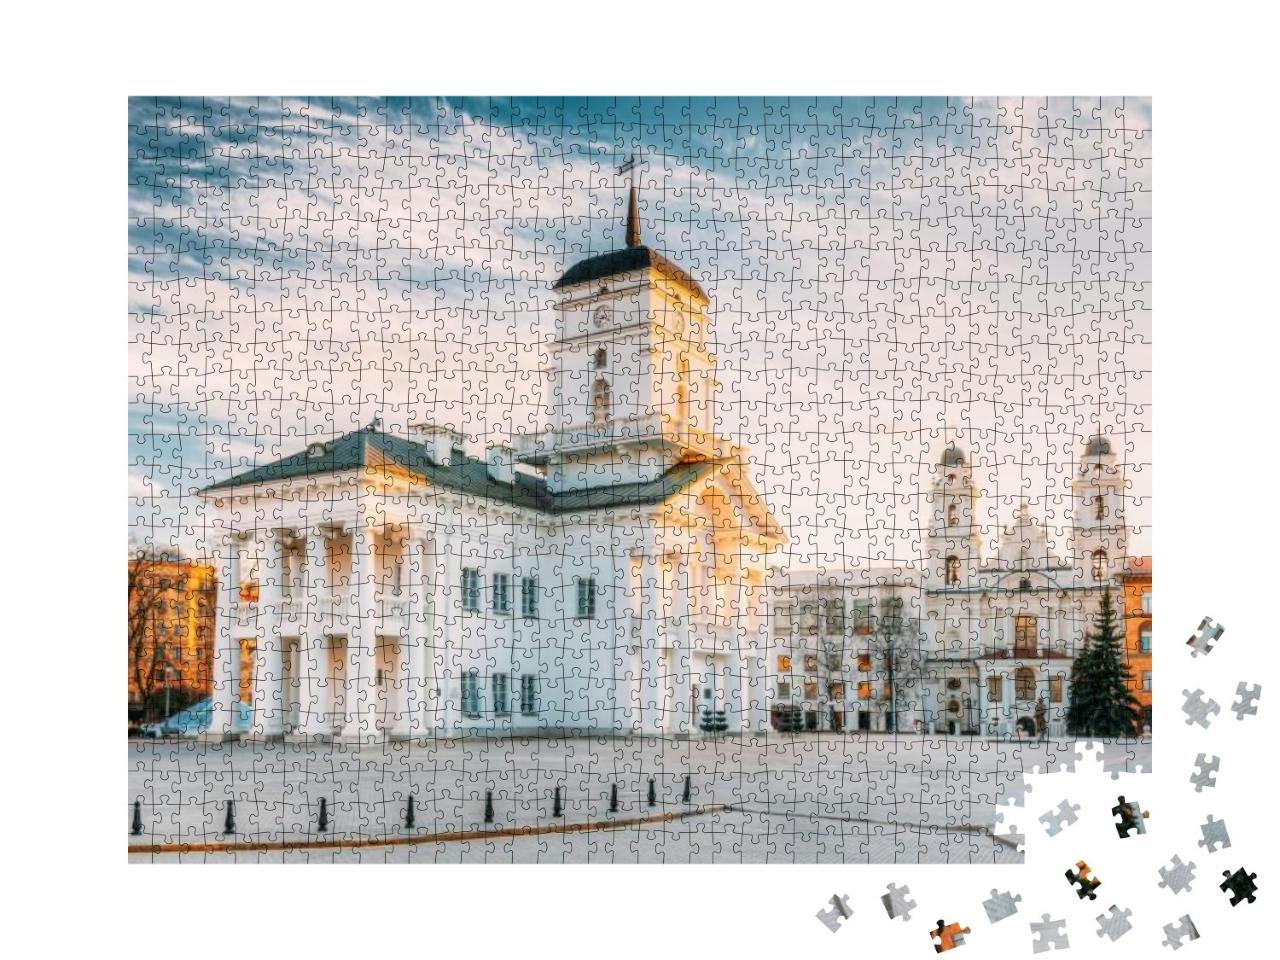 Minsk, Belarus. Famous Landmark - Old Minsk City Hall on... Jigsaw Puzzle with 1000 pieces